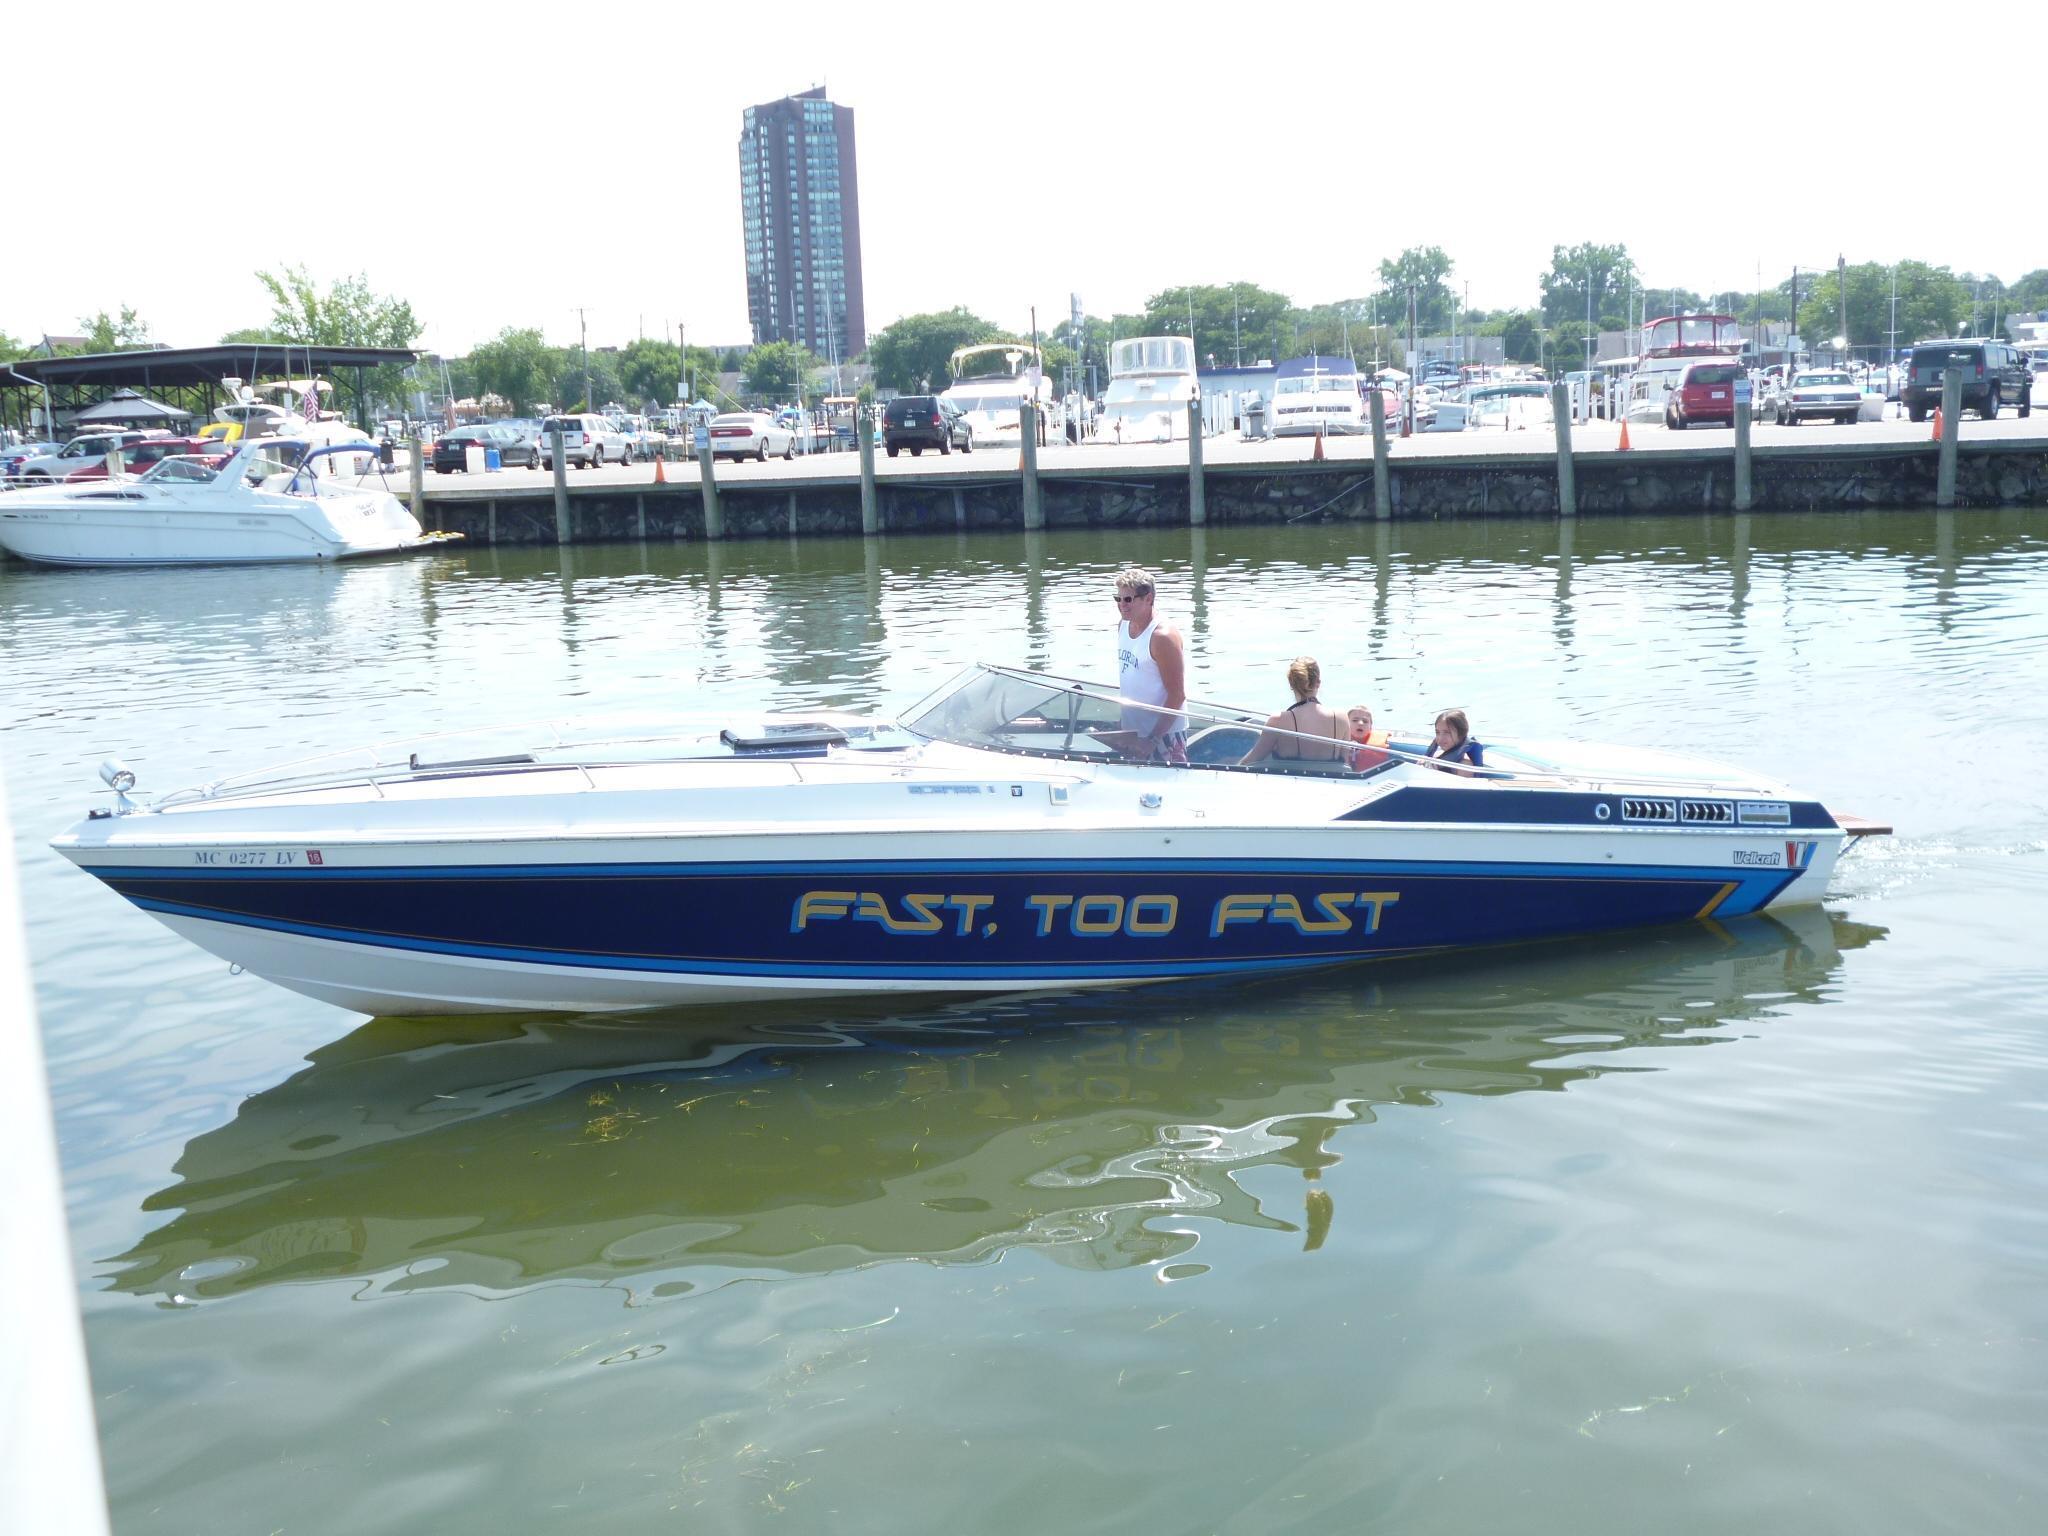 Wellcraft Scarab 30, st clair shores